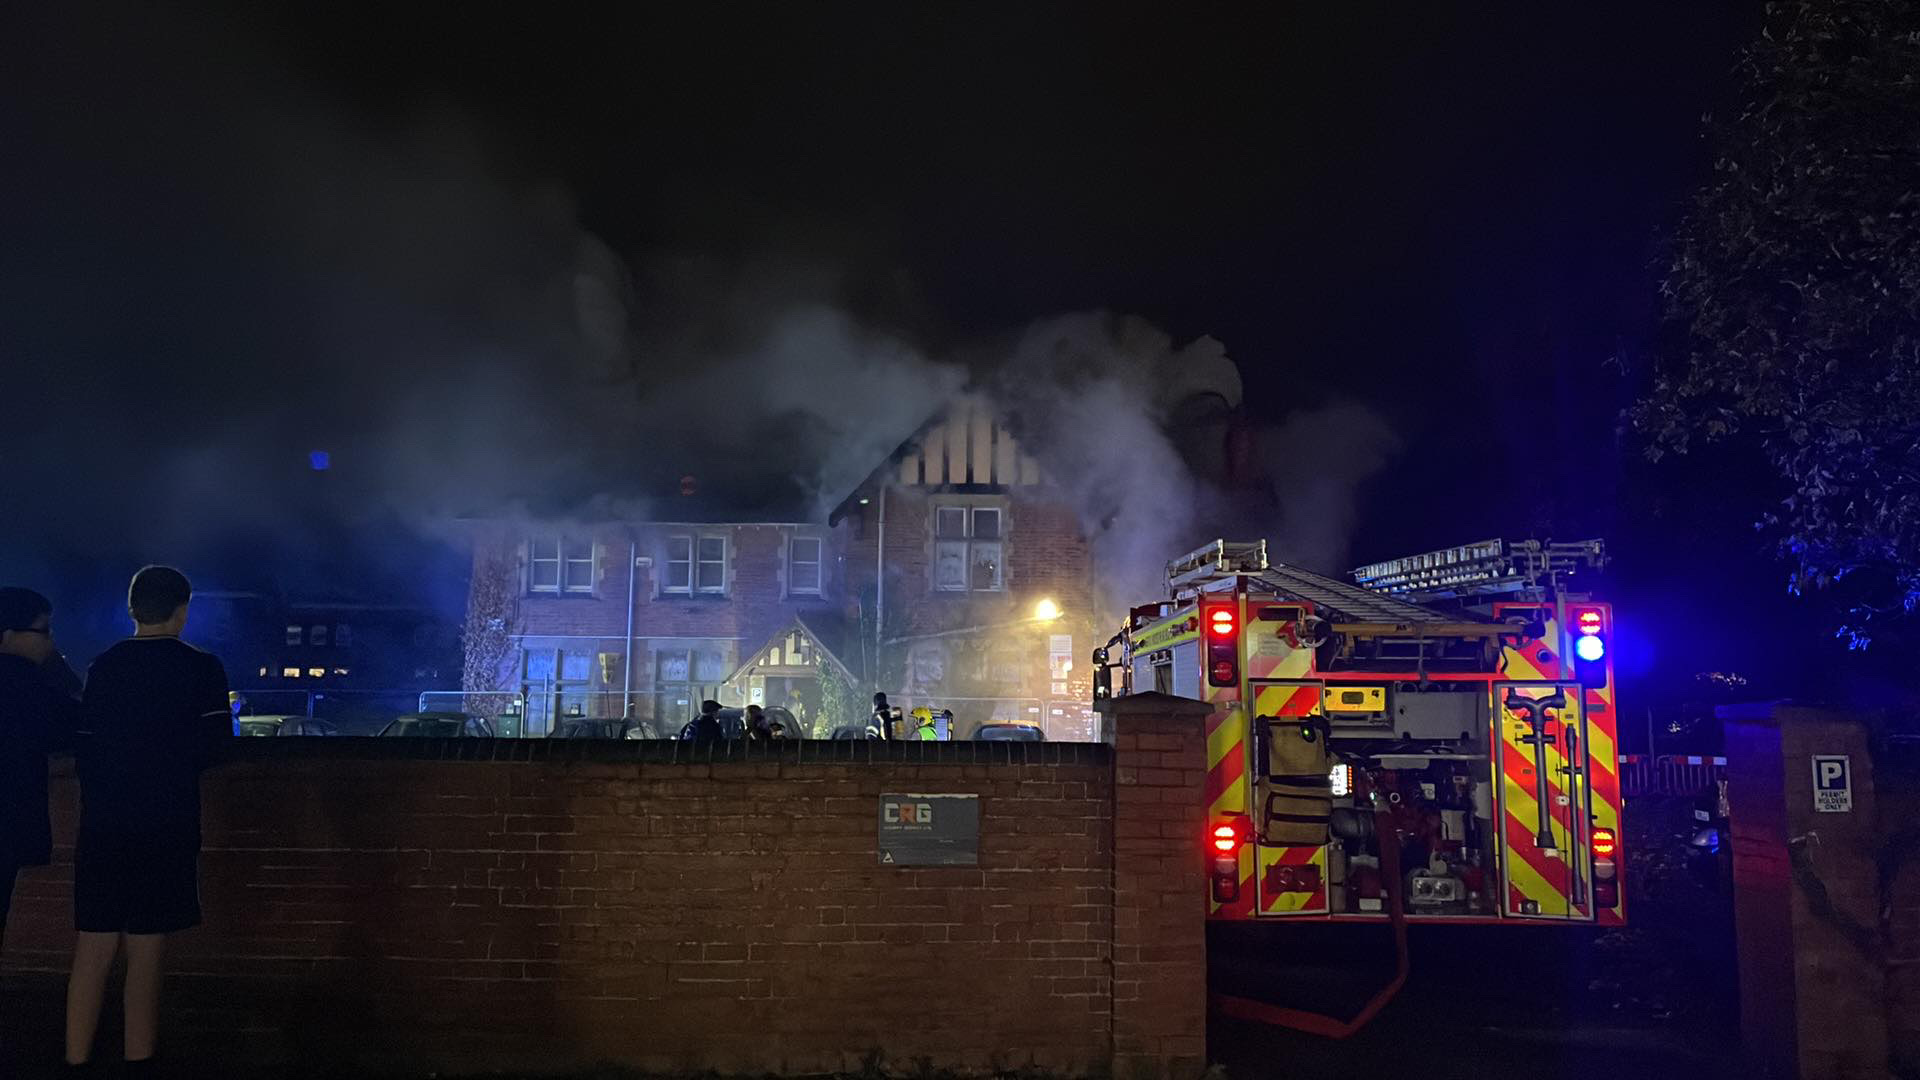 NEWS | Fire service provide update on fire at derelict building in Hereford